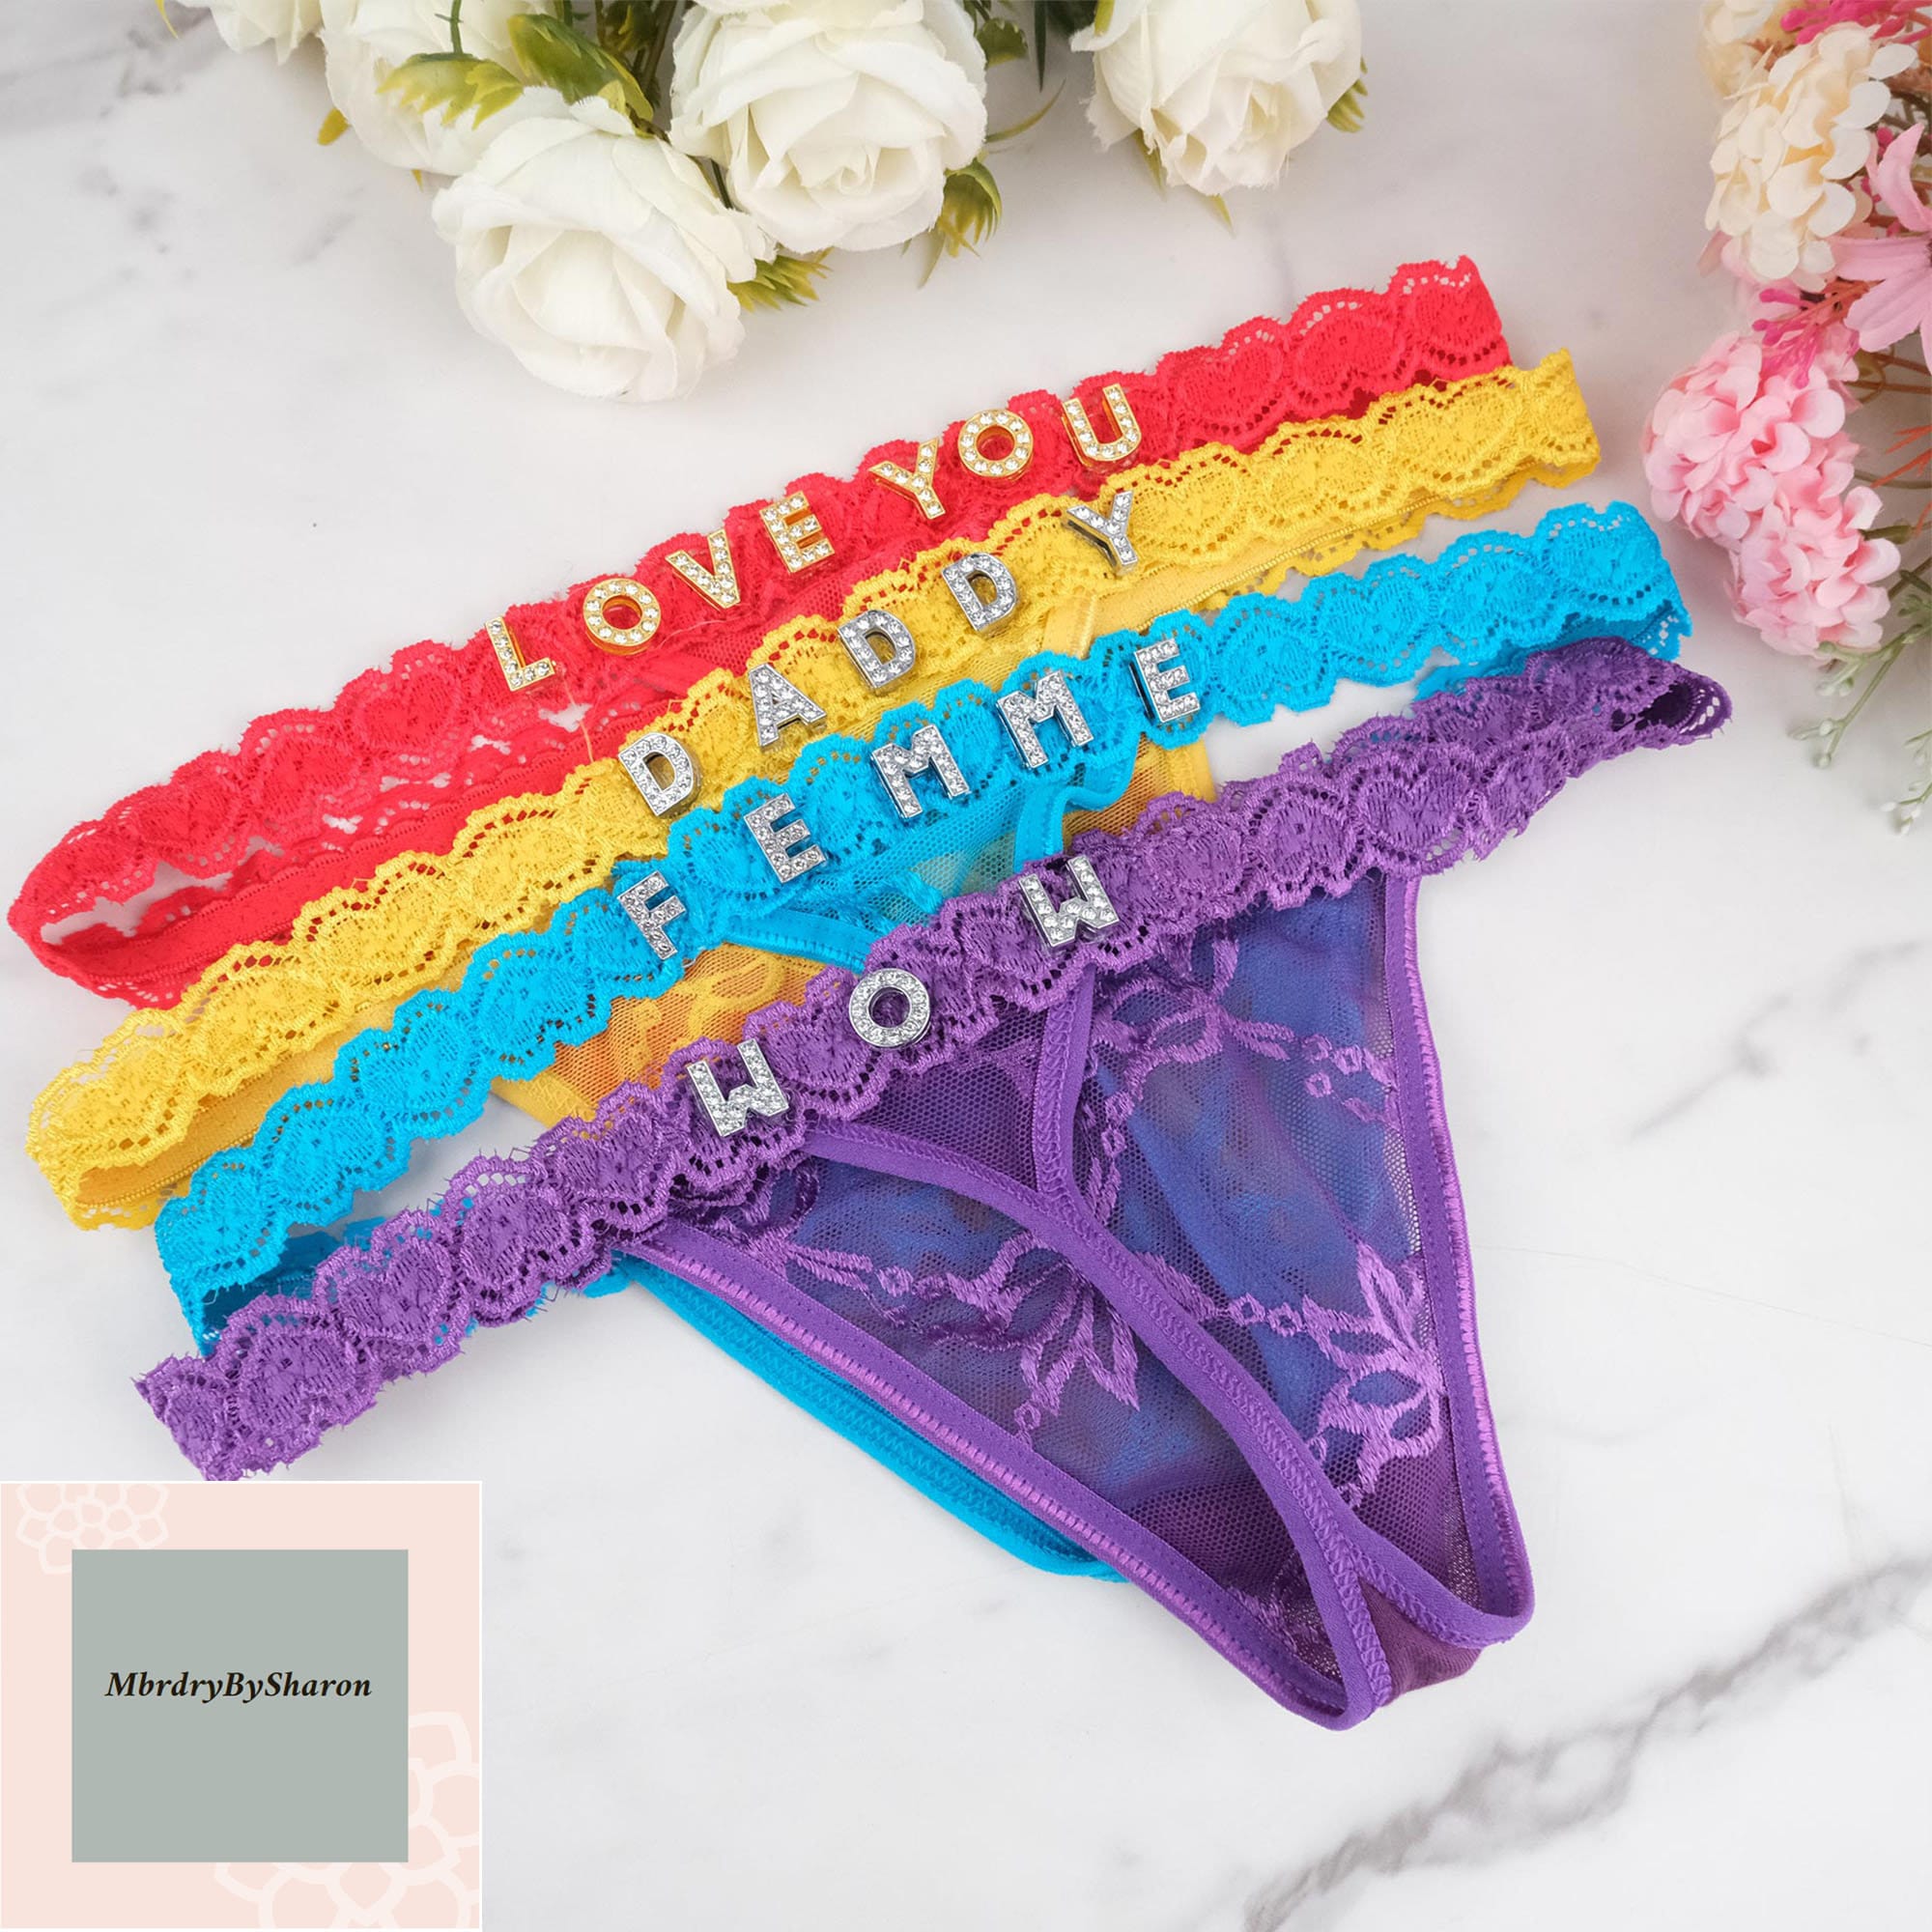 Sexy Lace Panties Women Customize Crystal Letter Name Underwear